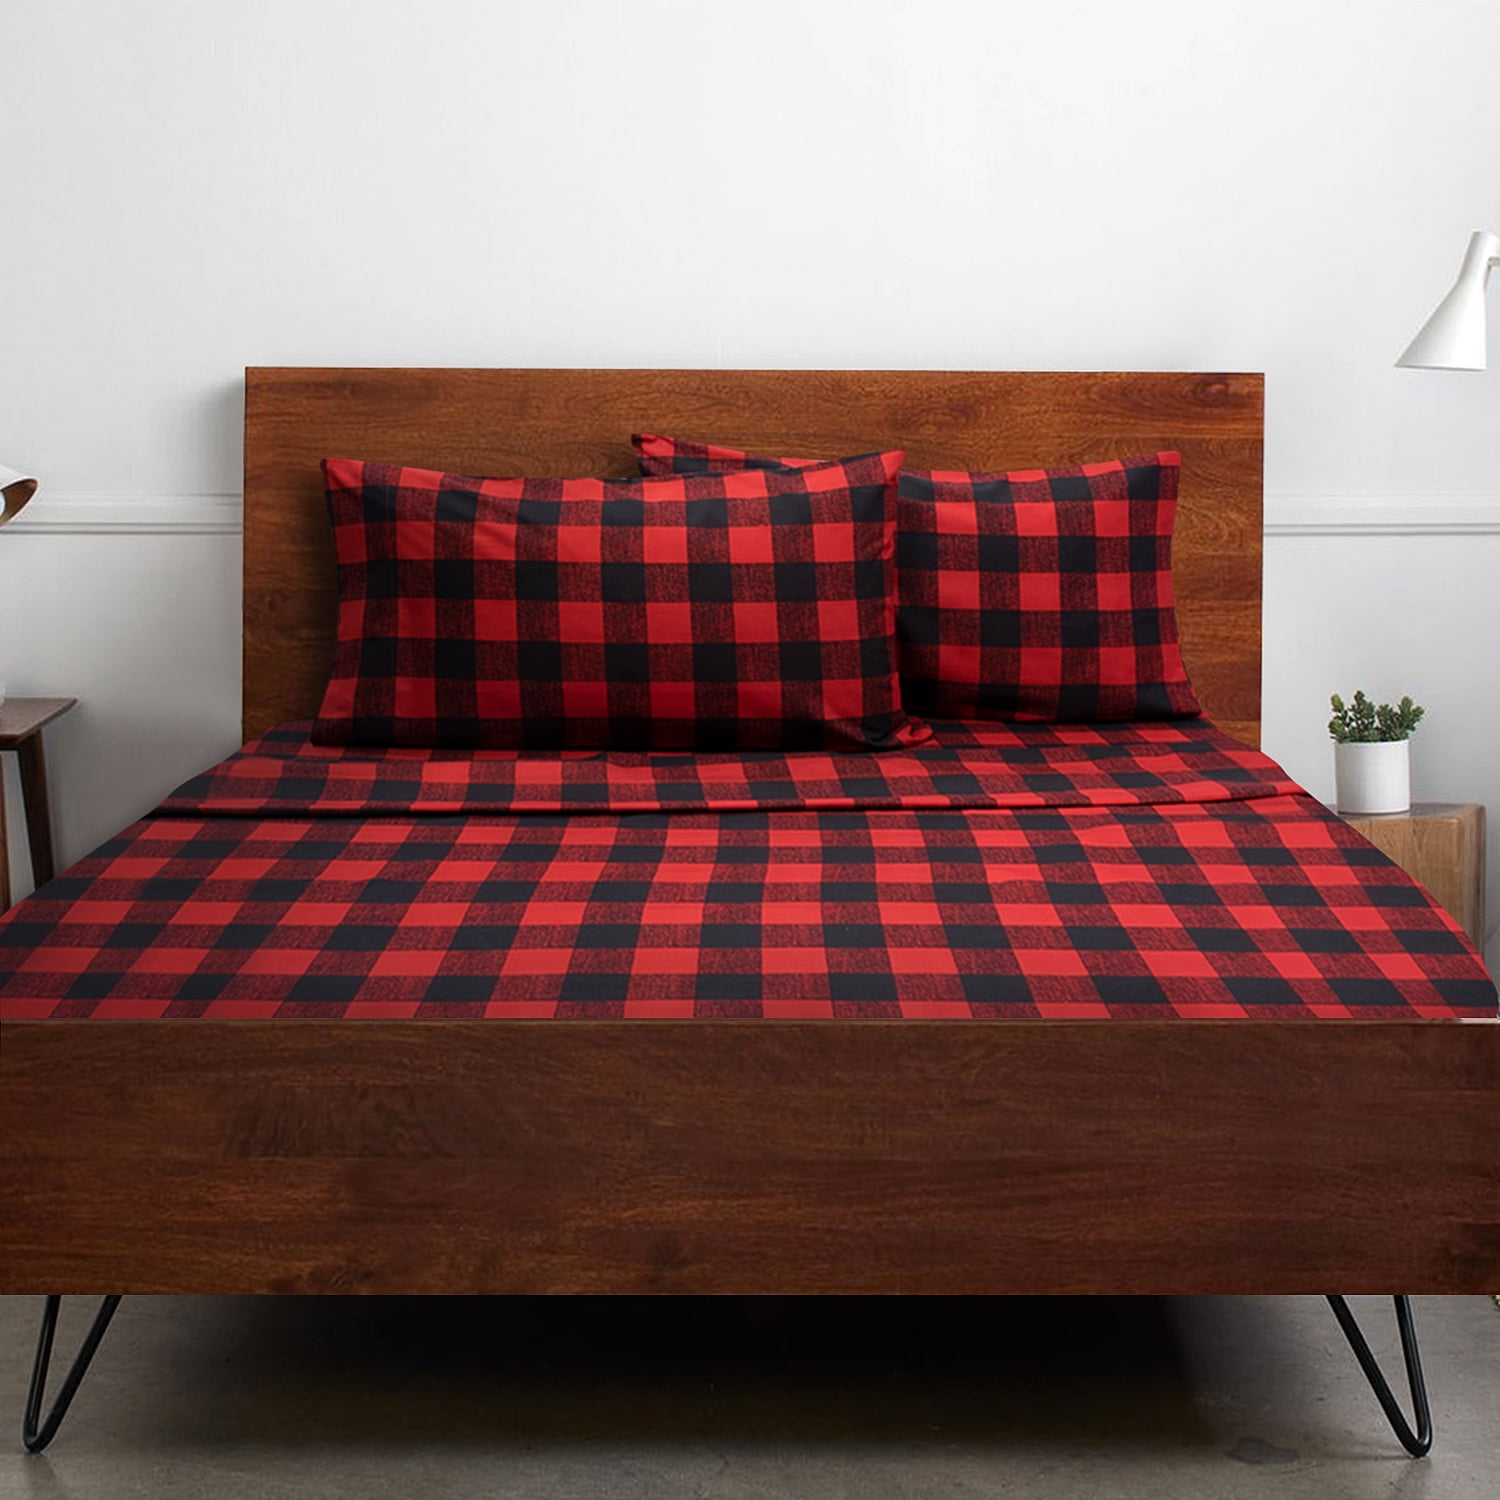 Habubu streepje stoomboot 1800 Thread Count Collection Buffalo Plaid Black Red 4 Pc Bed Sheet Set  Queen - Walmart.com